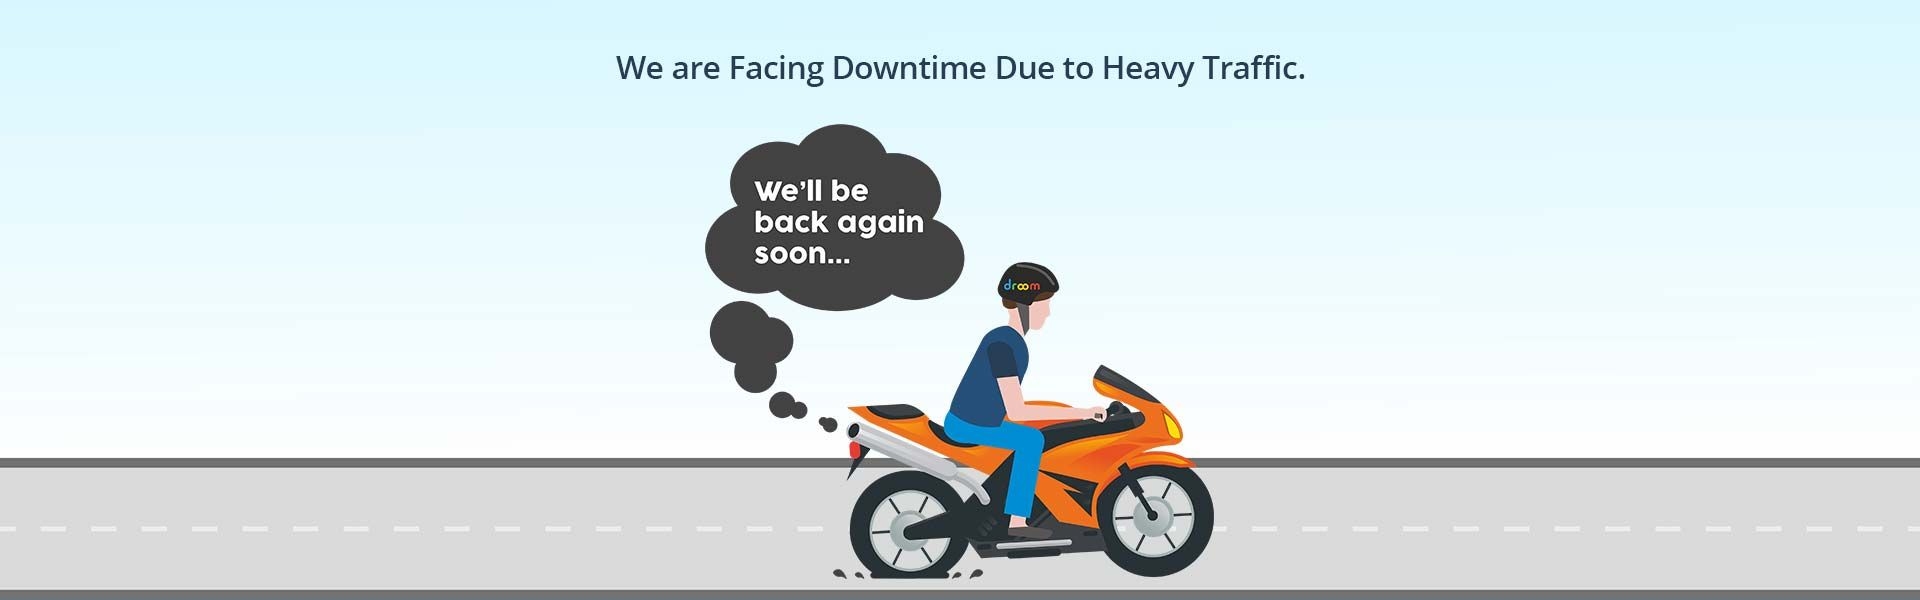 due to heavy traffic